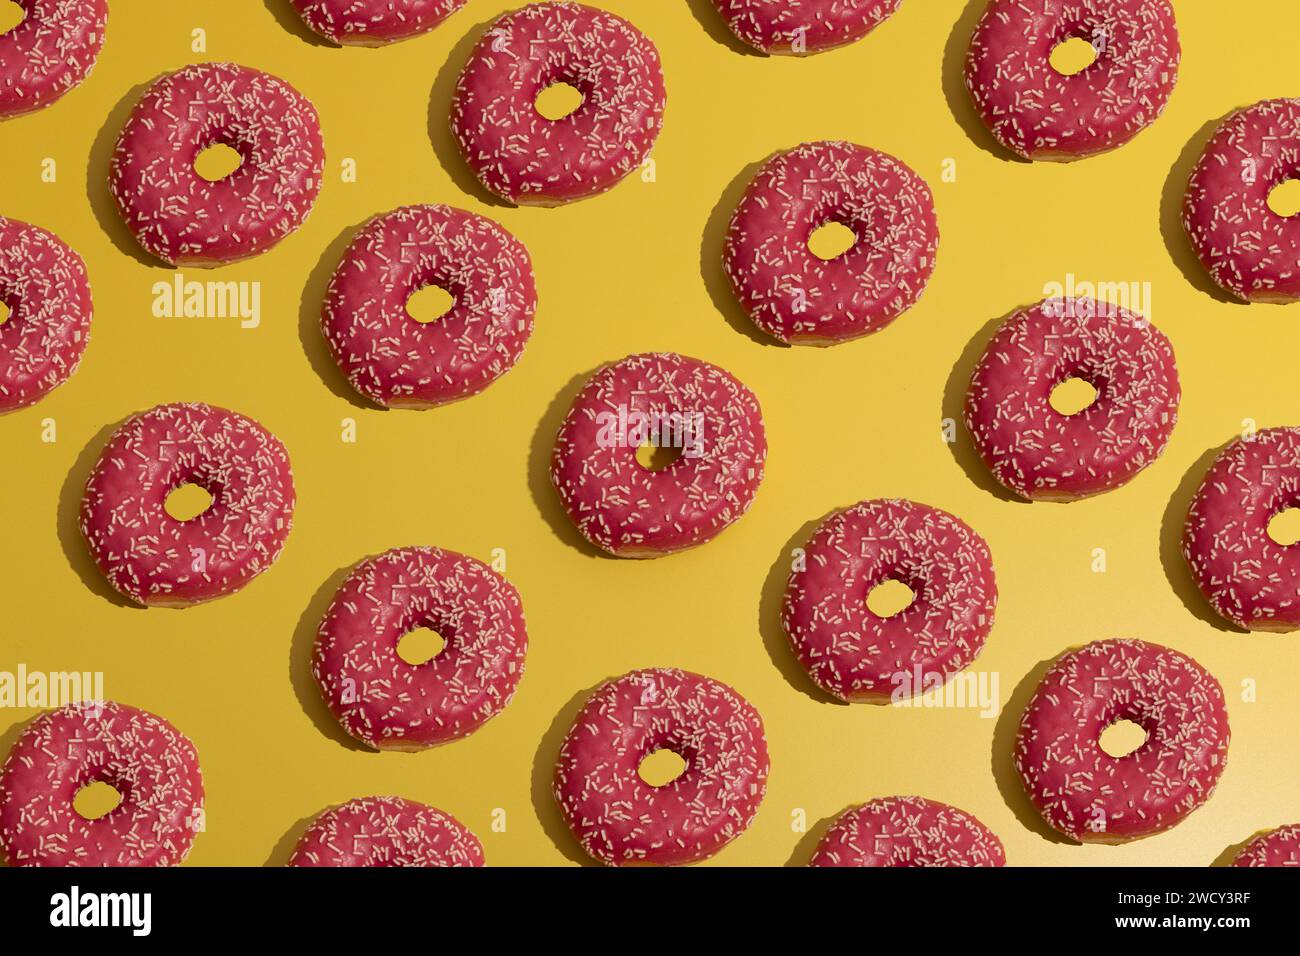 Flat lay image of pink donut repetitive pattern composition Stock Photo